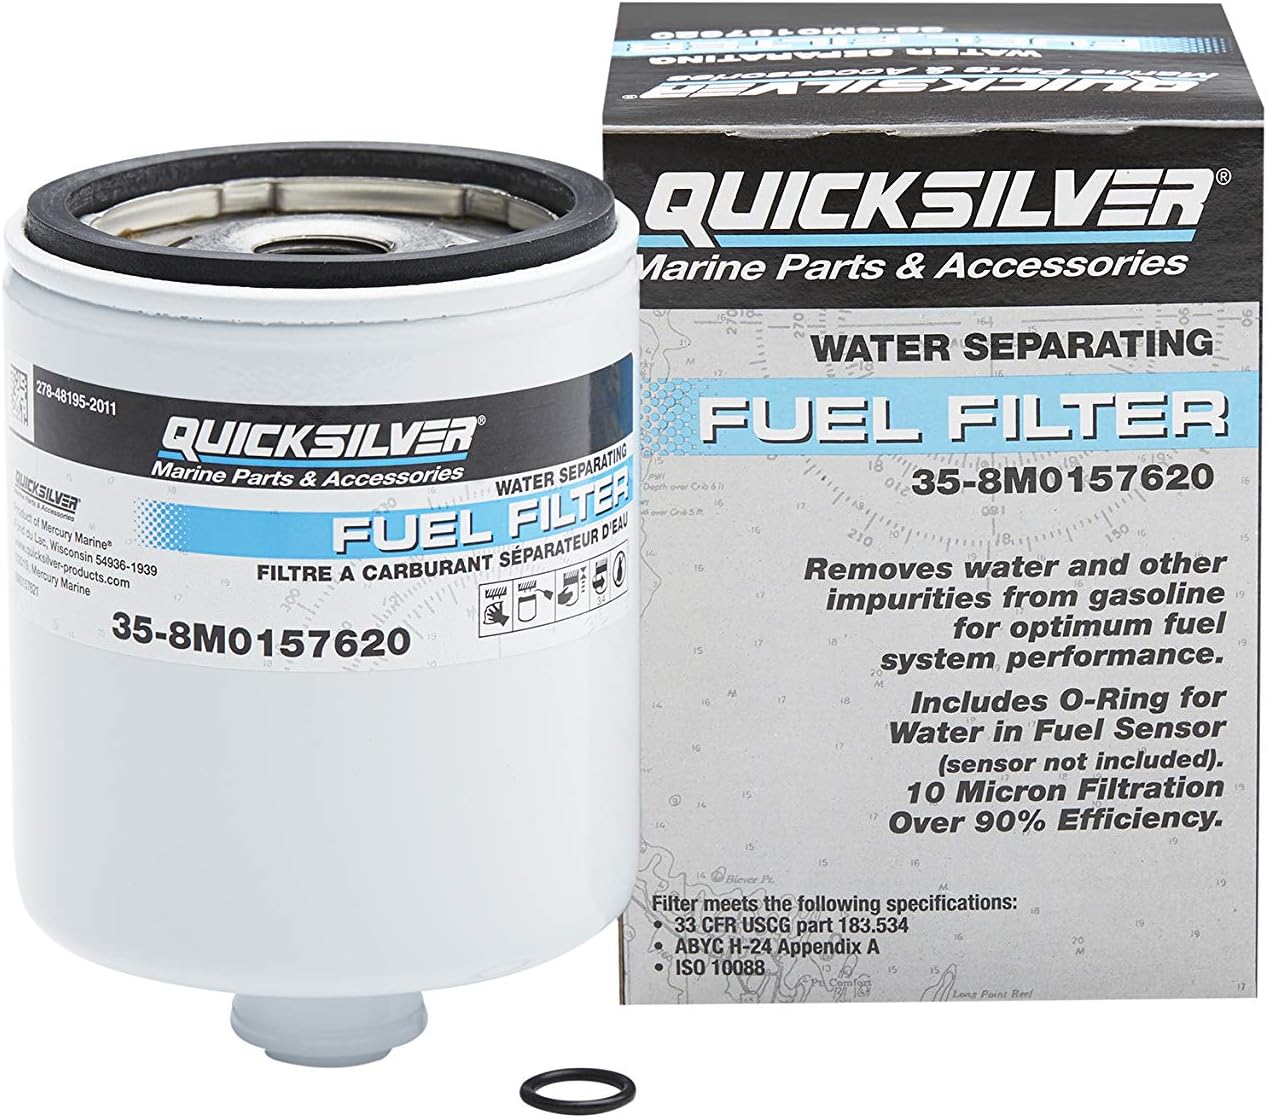 Quicksilver Water Separating Fuel Filter for Mariner Outboard Water Seperator 